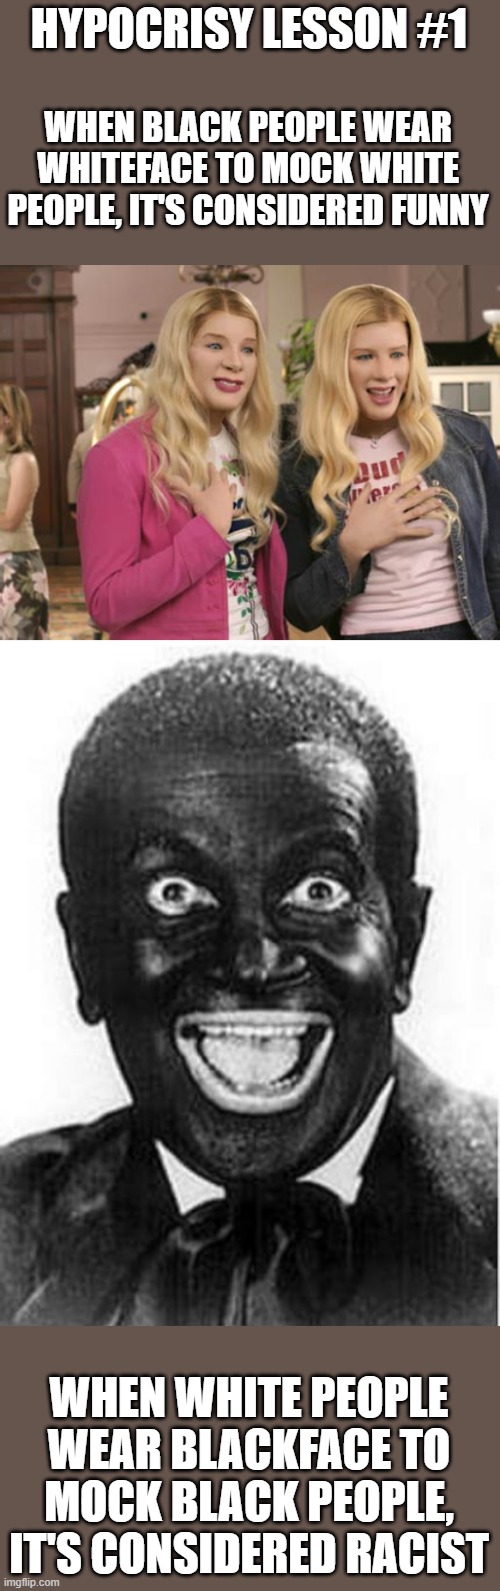 Although, "White Chicks" is far from funny. The point still stands. | HYPOCRISY LESSON #1; WHEN BLACK PEOPLE WEAR WHITEFACE TO MOCK WHITE PEOPLE, IT'S CONSIDERED FUNNY; WHEN WHITE PEOPLE WEAR BLACKFACE TO MOCK BLACK PEOPLE, IT'S CONSIDERED RACIST | image tagged in black face,white chicks,white face | made w/ Imgflip meme maker